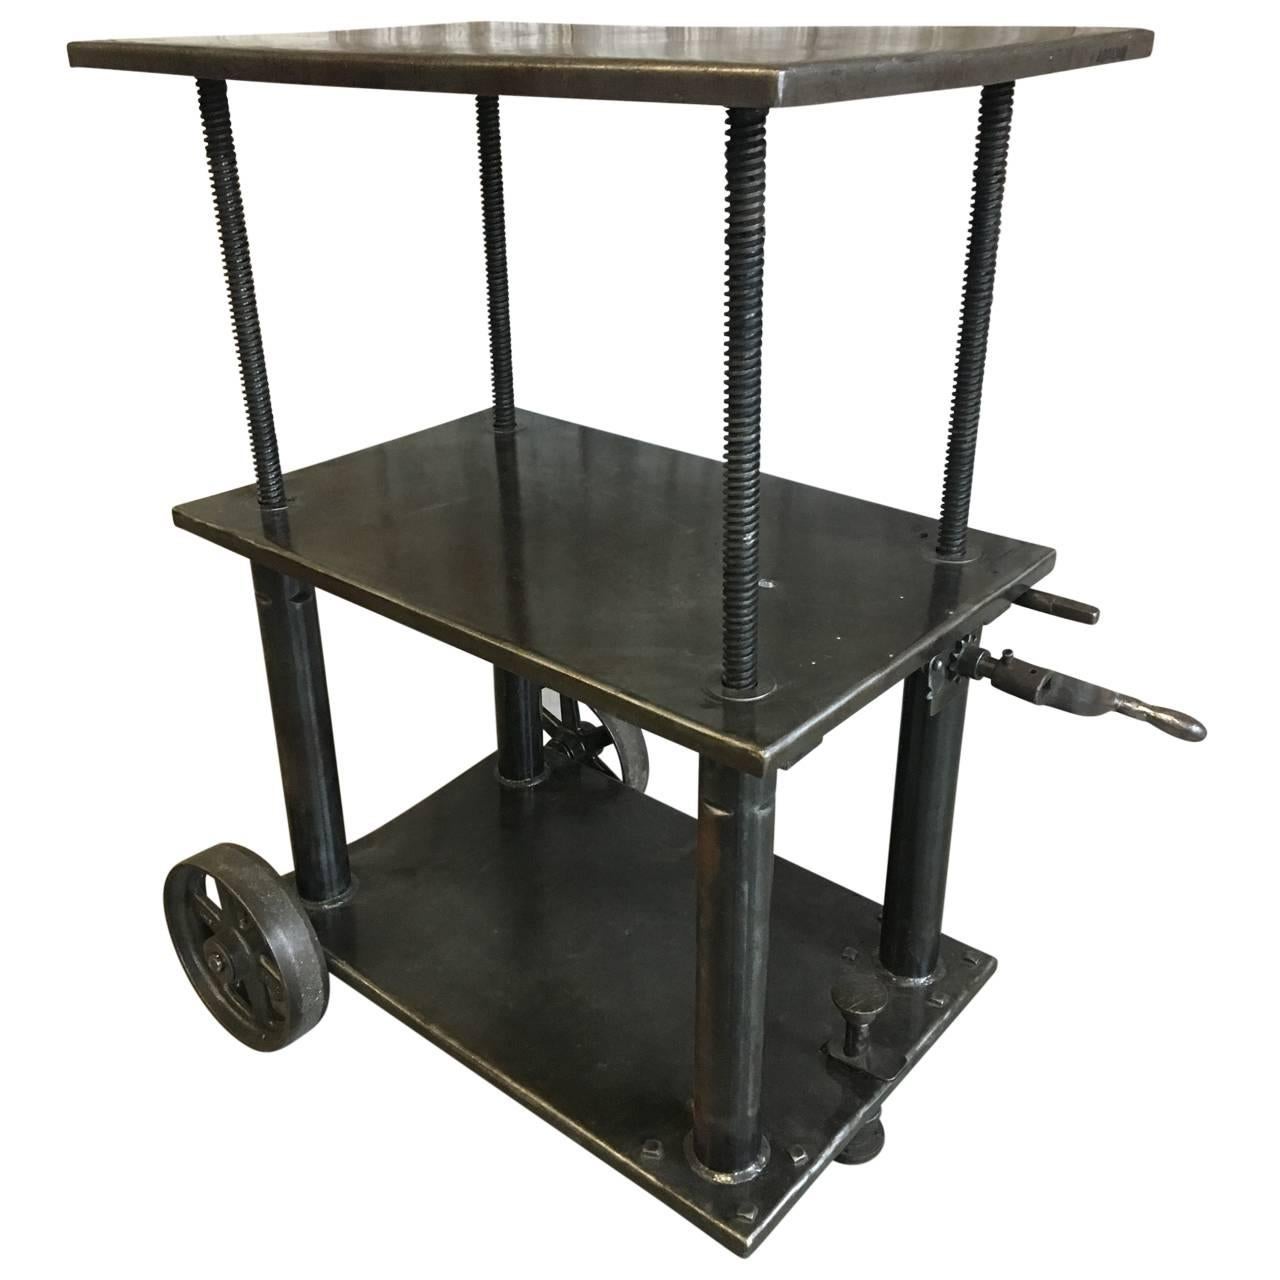 Industrial lift bar cart.
Highest setting 39 inches.
Lowest setting 26 inches.